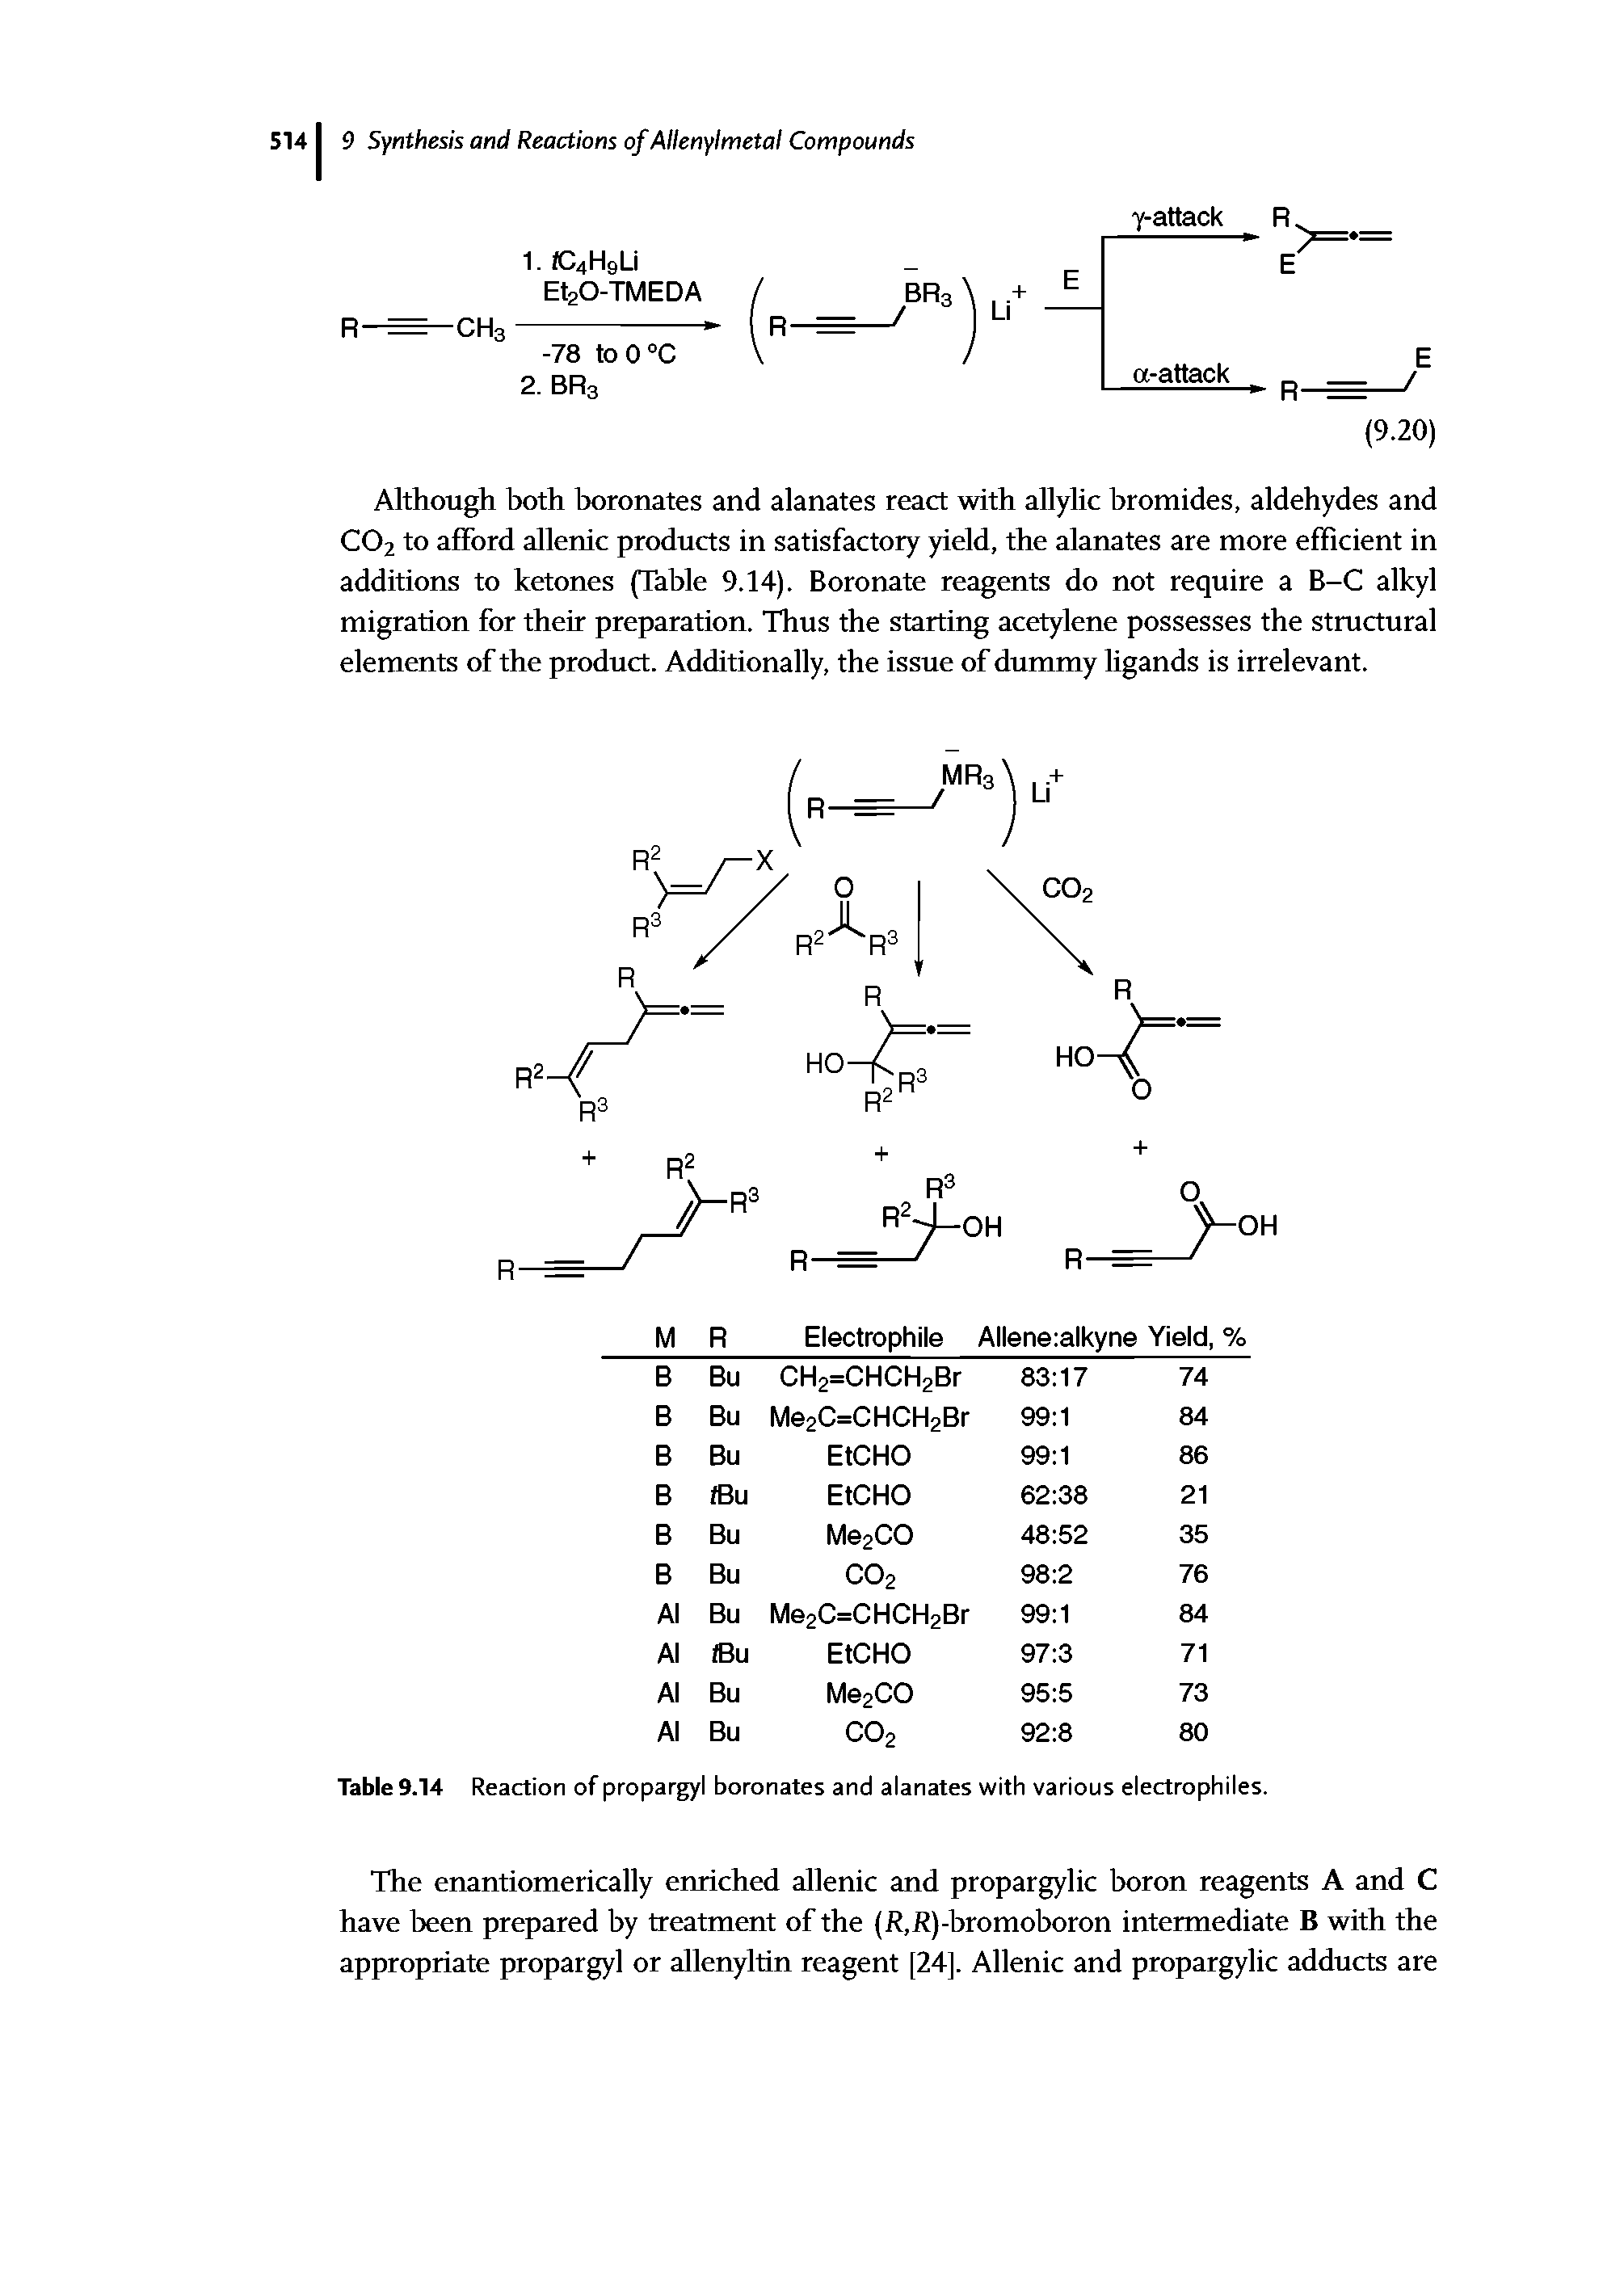 Table 9.14 Reaction of propargyl boronates and alanates with various electrophiles.